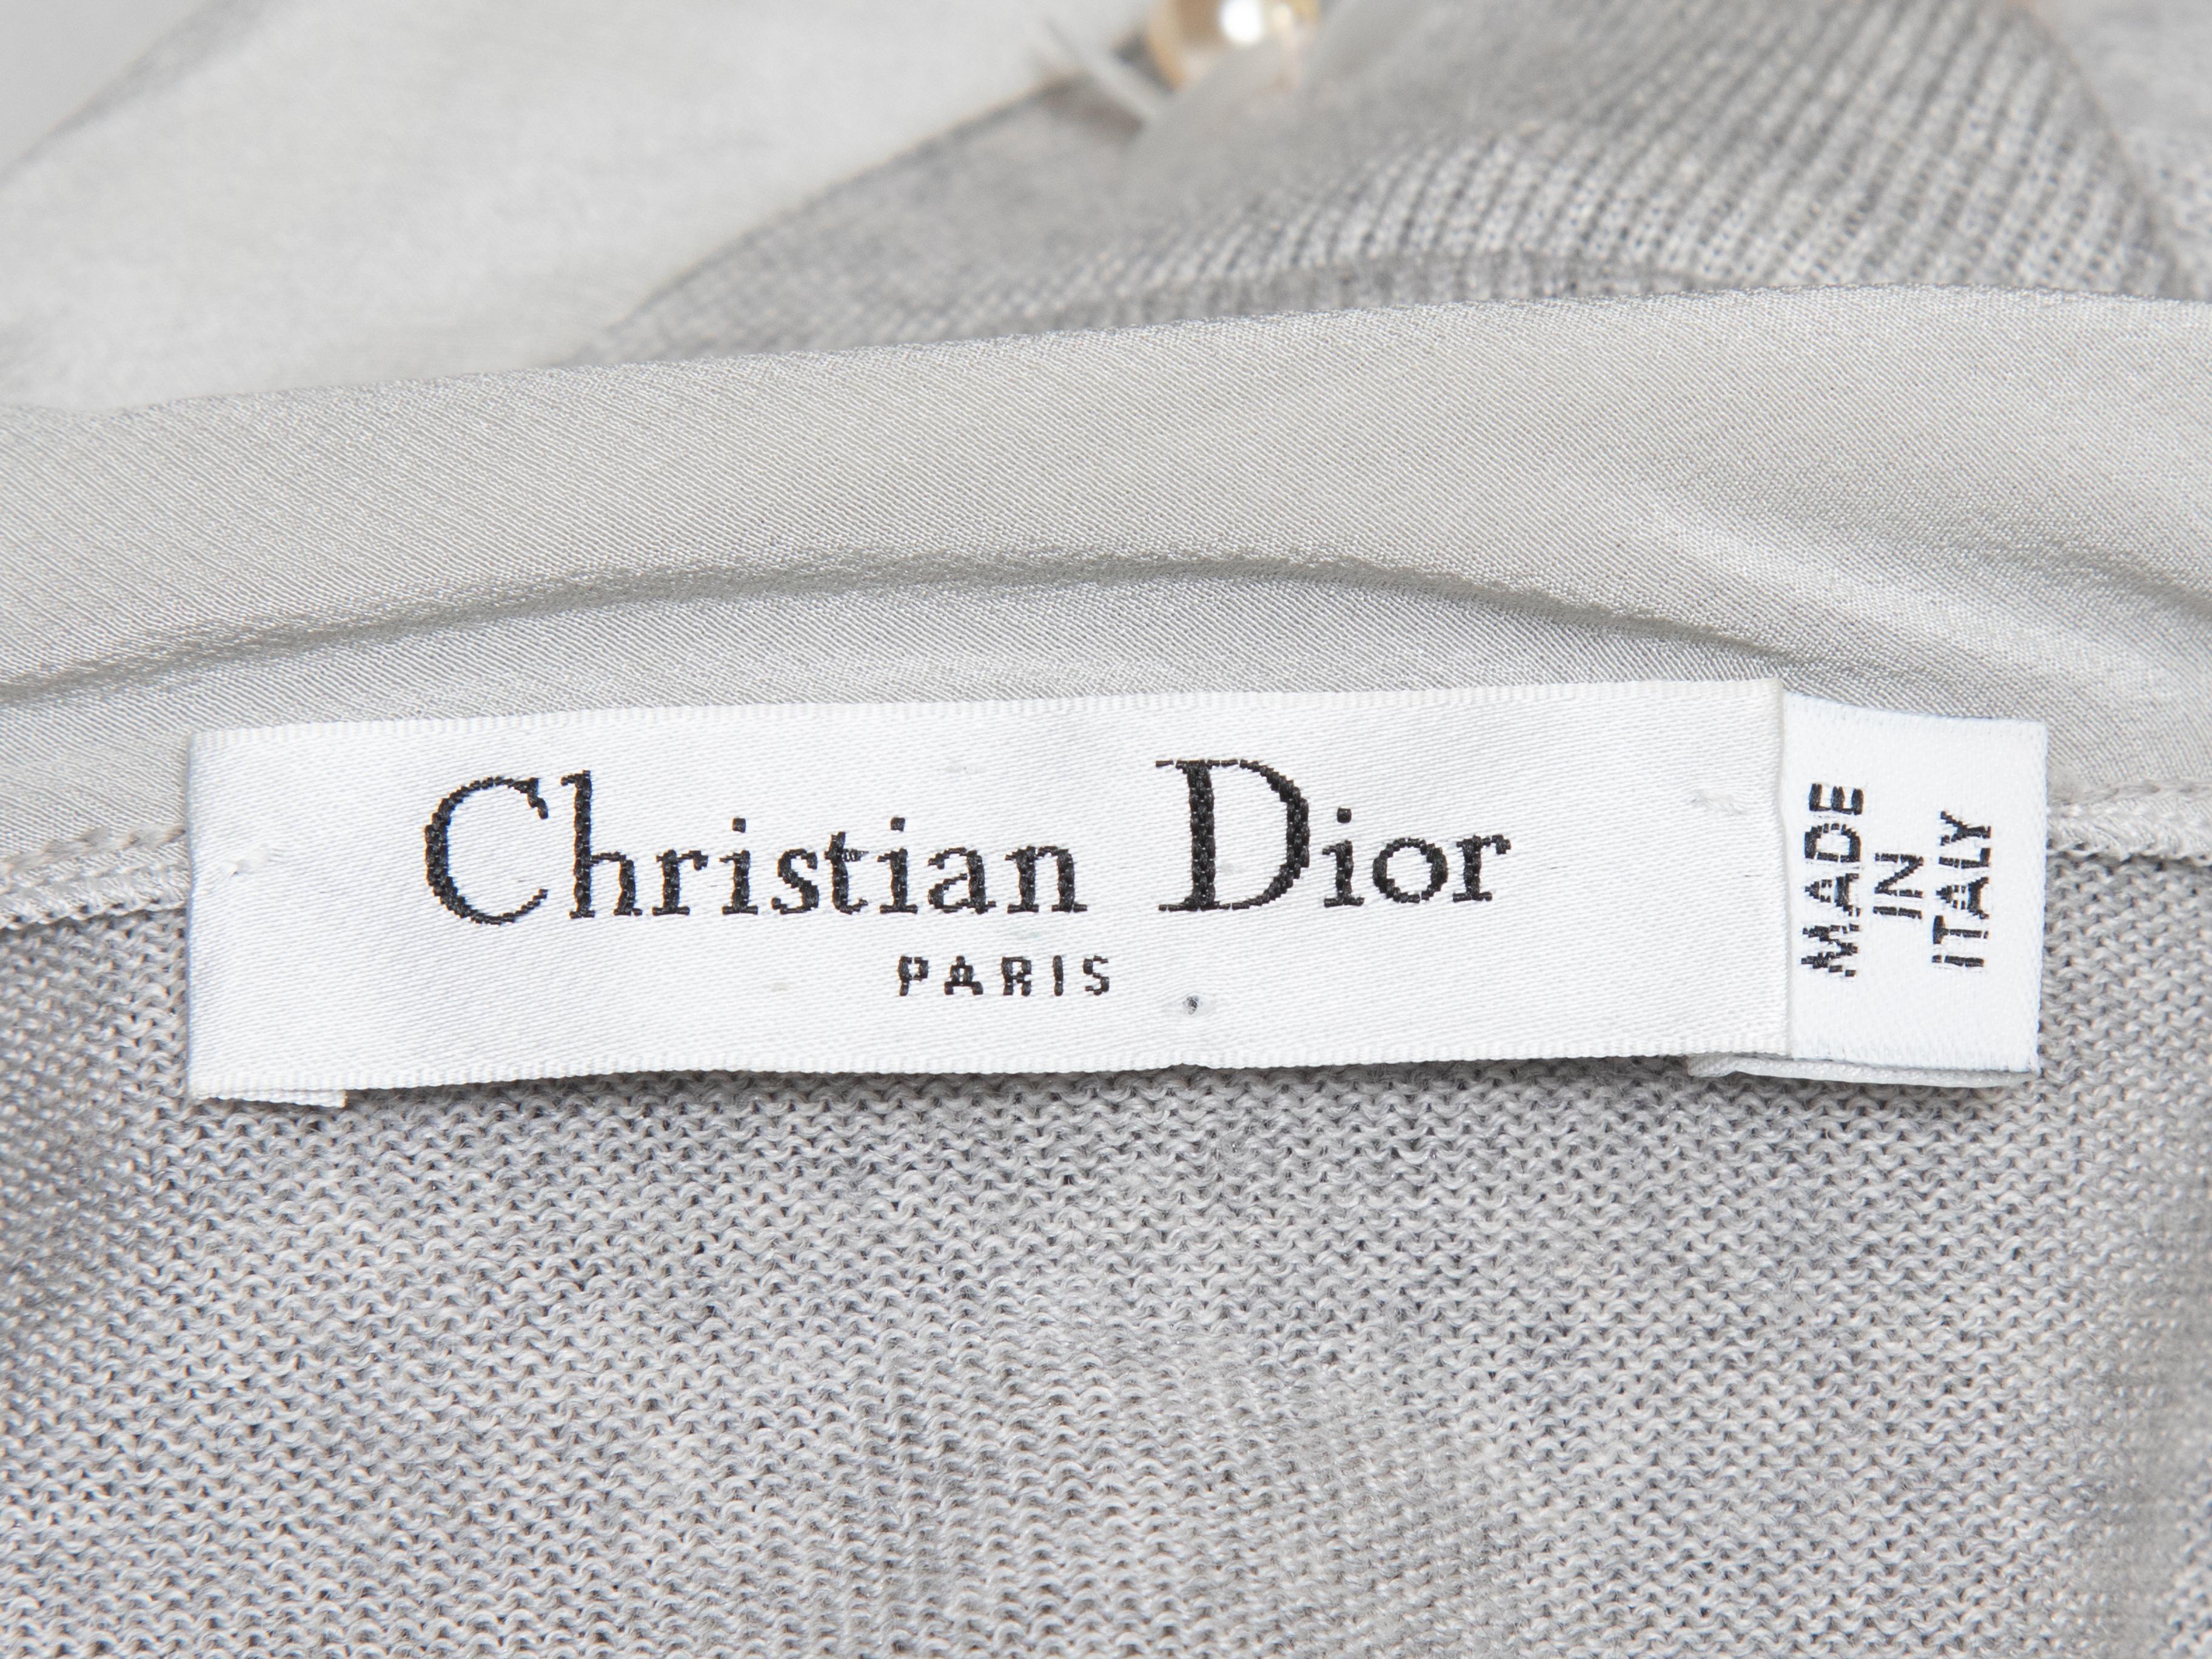 Grey wool-blend cardigan by Christian Dior. Pearl and sequin embellishments at front. Silk tie closure at front neck. 30